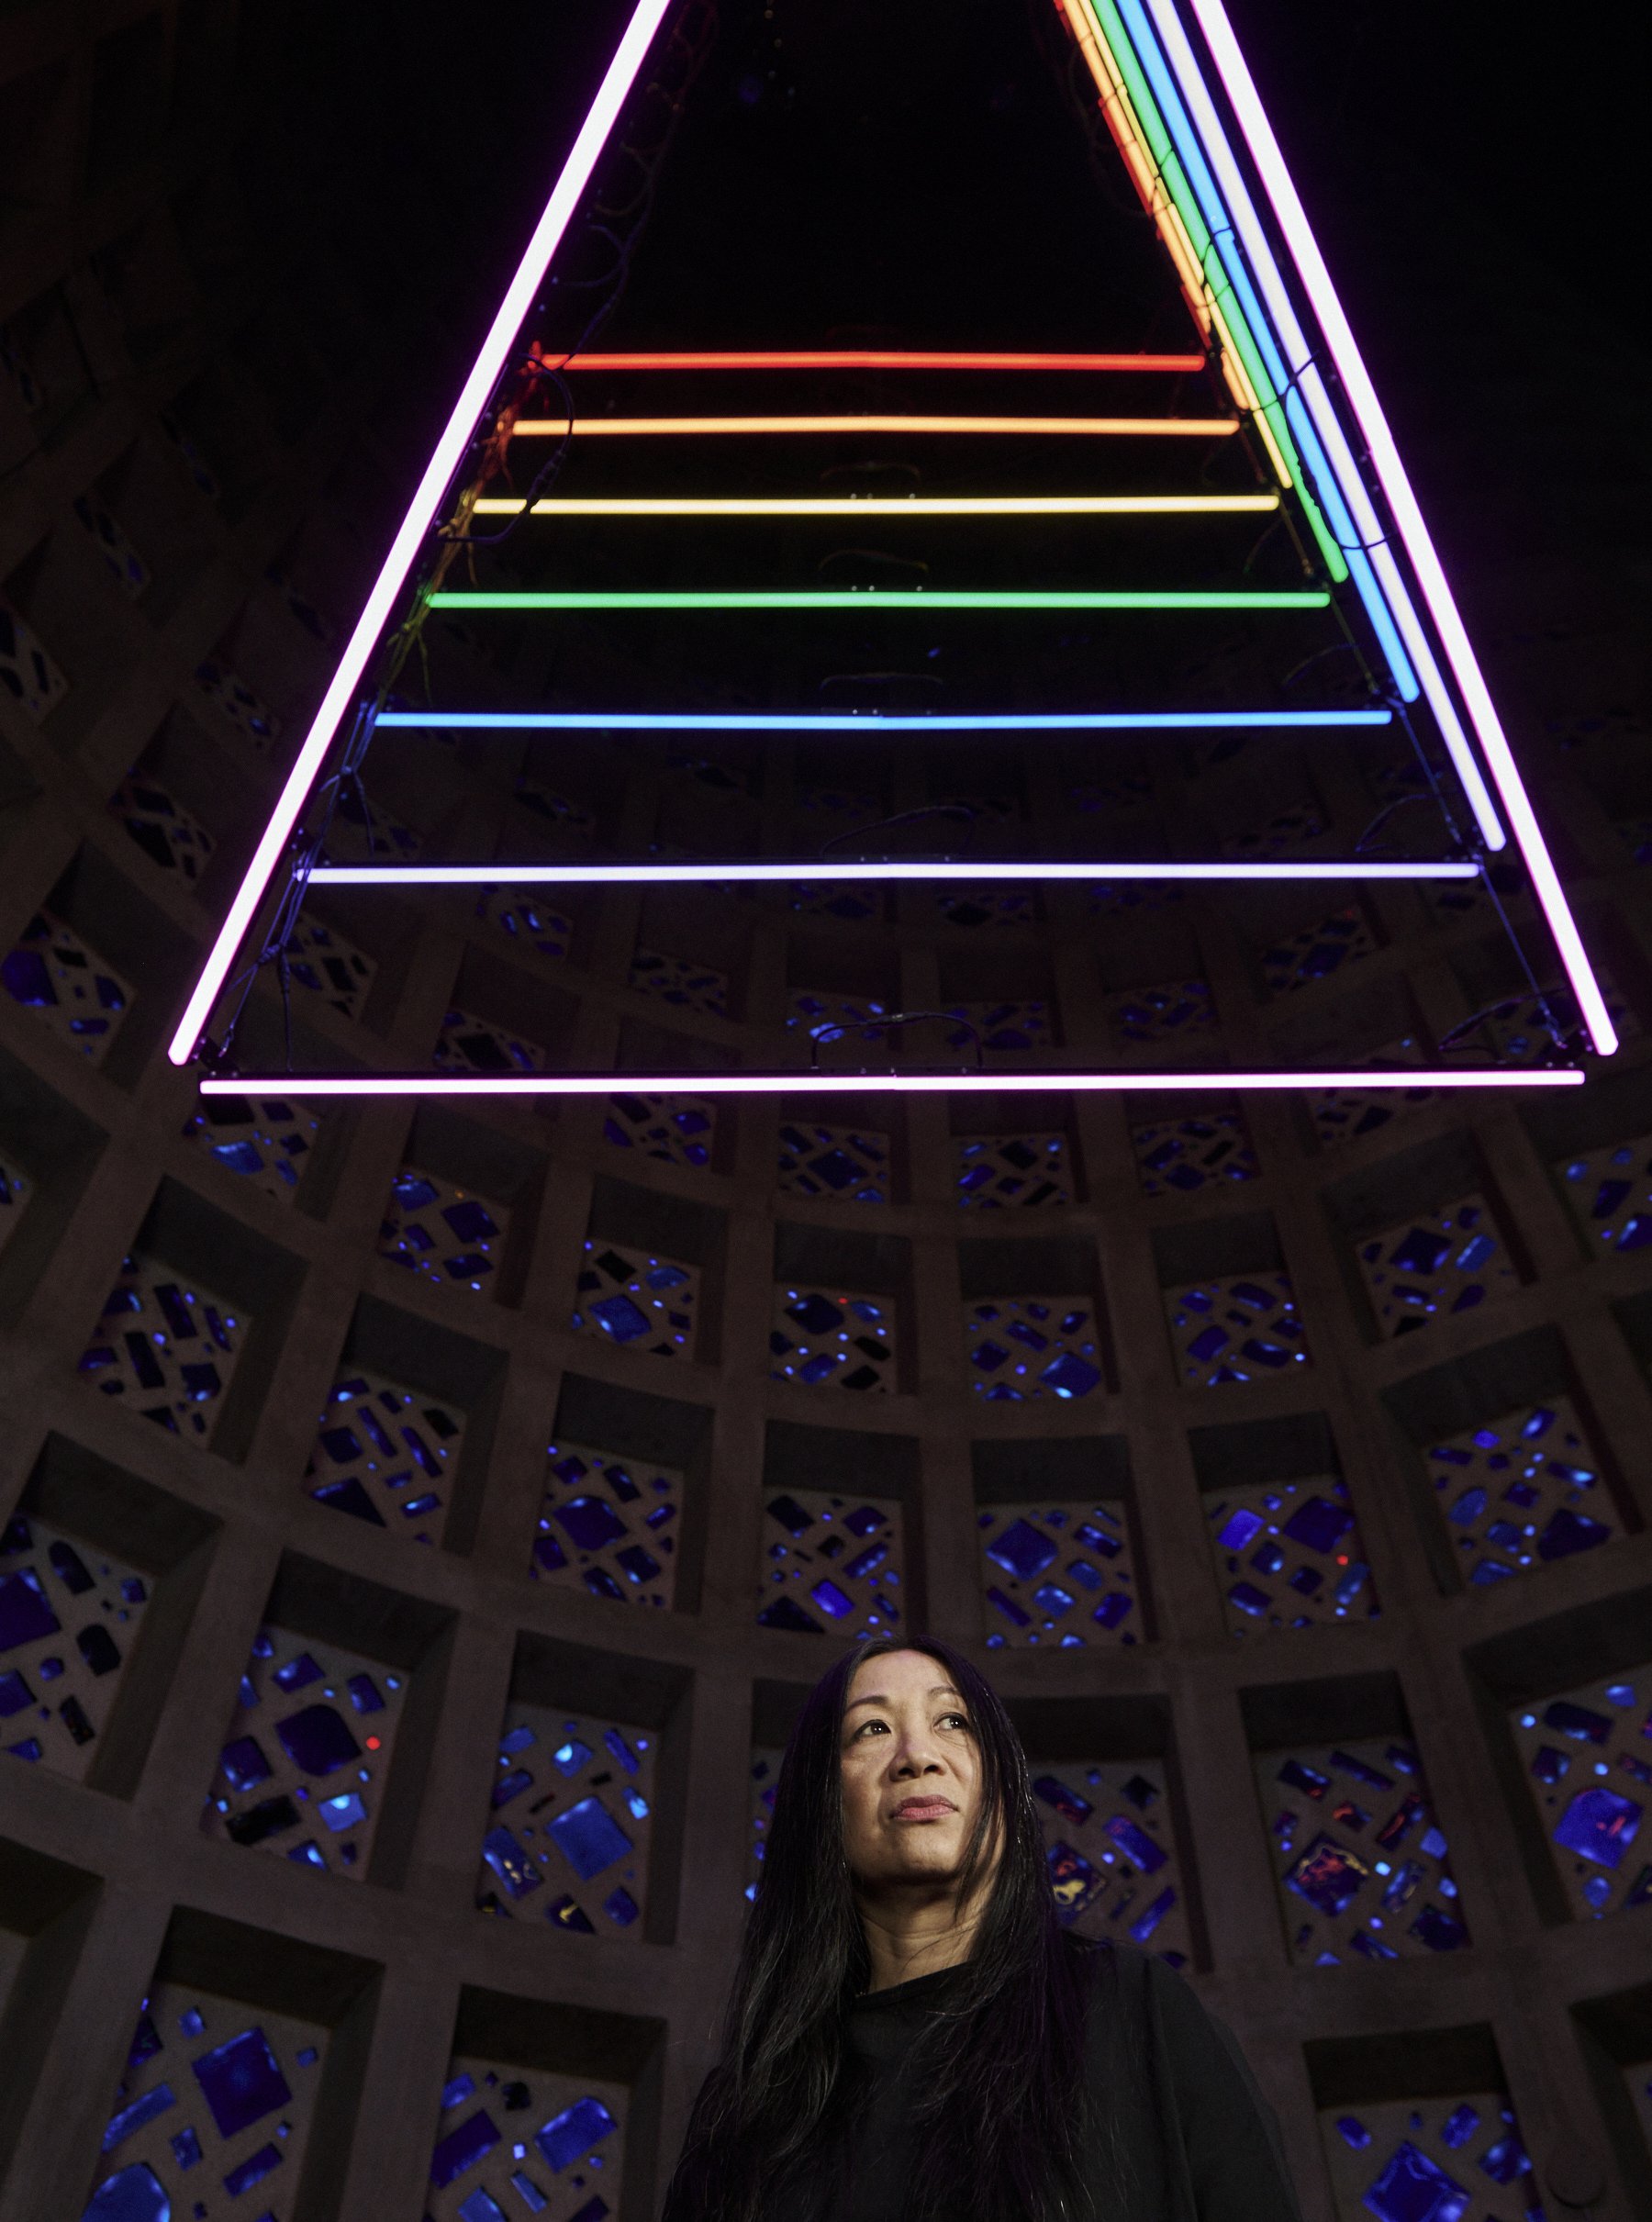  Artist CHiKa photographed with her light sculpture installation at the New York Hall of Science. 